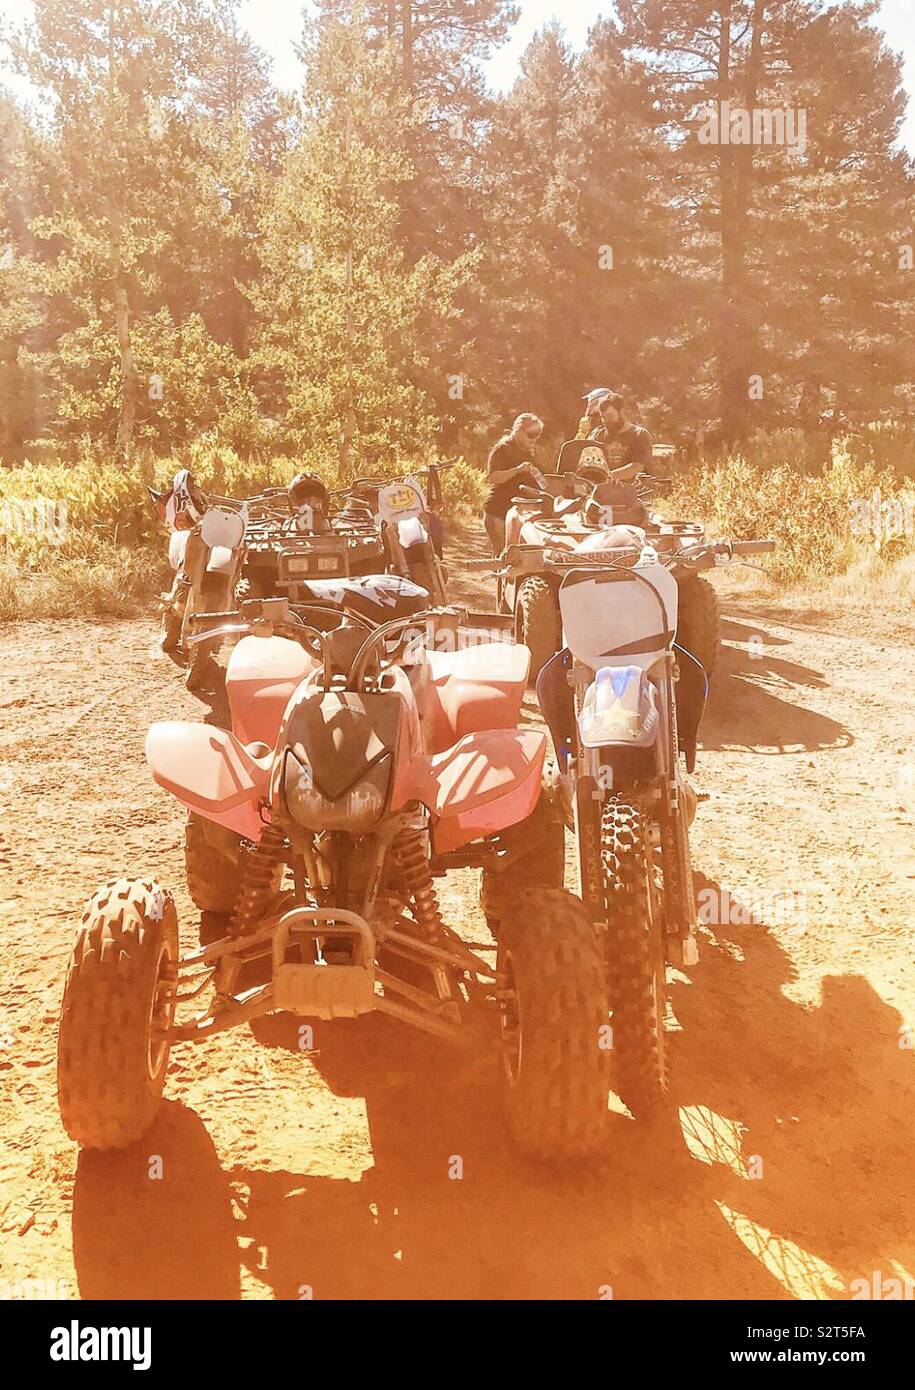 Quads parked, sun shining down on them, reflecting on the dirt ground, surrounded by trees among the forest Stock Photo